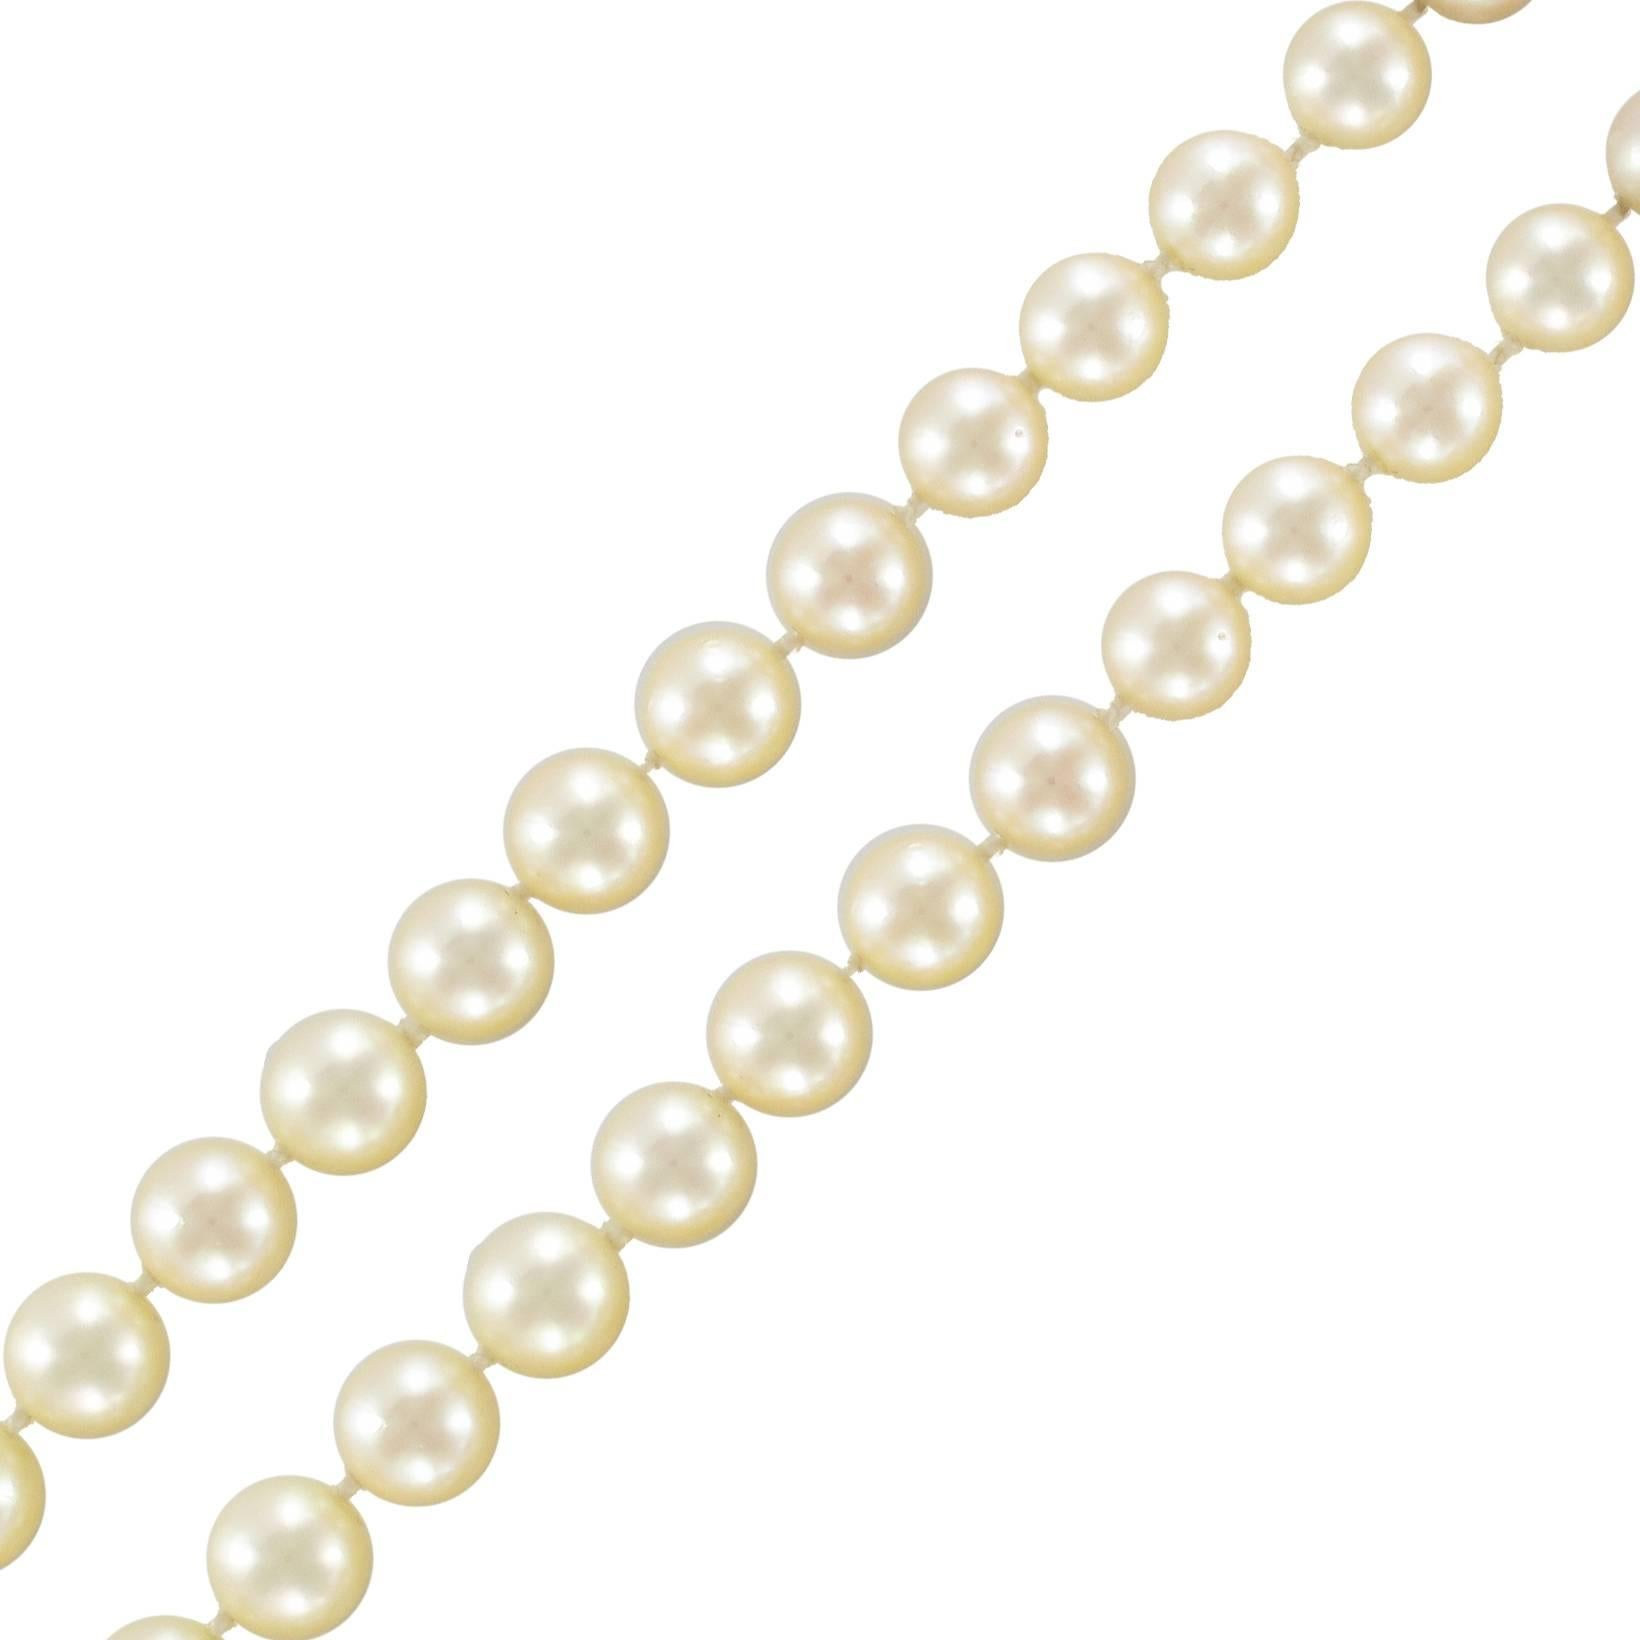 This antique pearl necklace is composed of two strands of Japanese cultured pearls which are held together by a rectangular chiselled 18K yellow gold double ratchet bearing an eagle head hallmark. 

Total length of the shortest row: 50.5 cm,